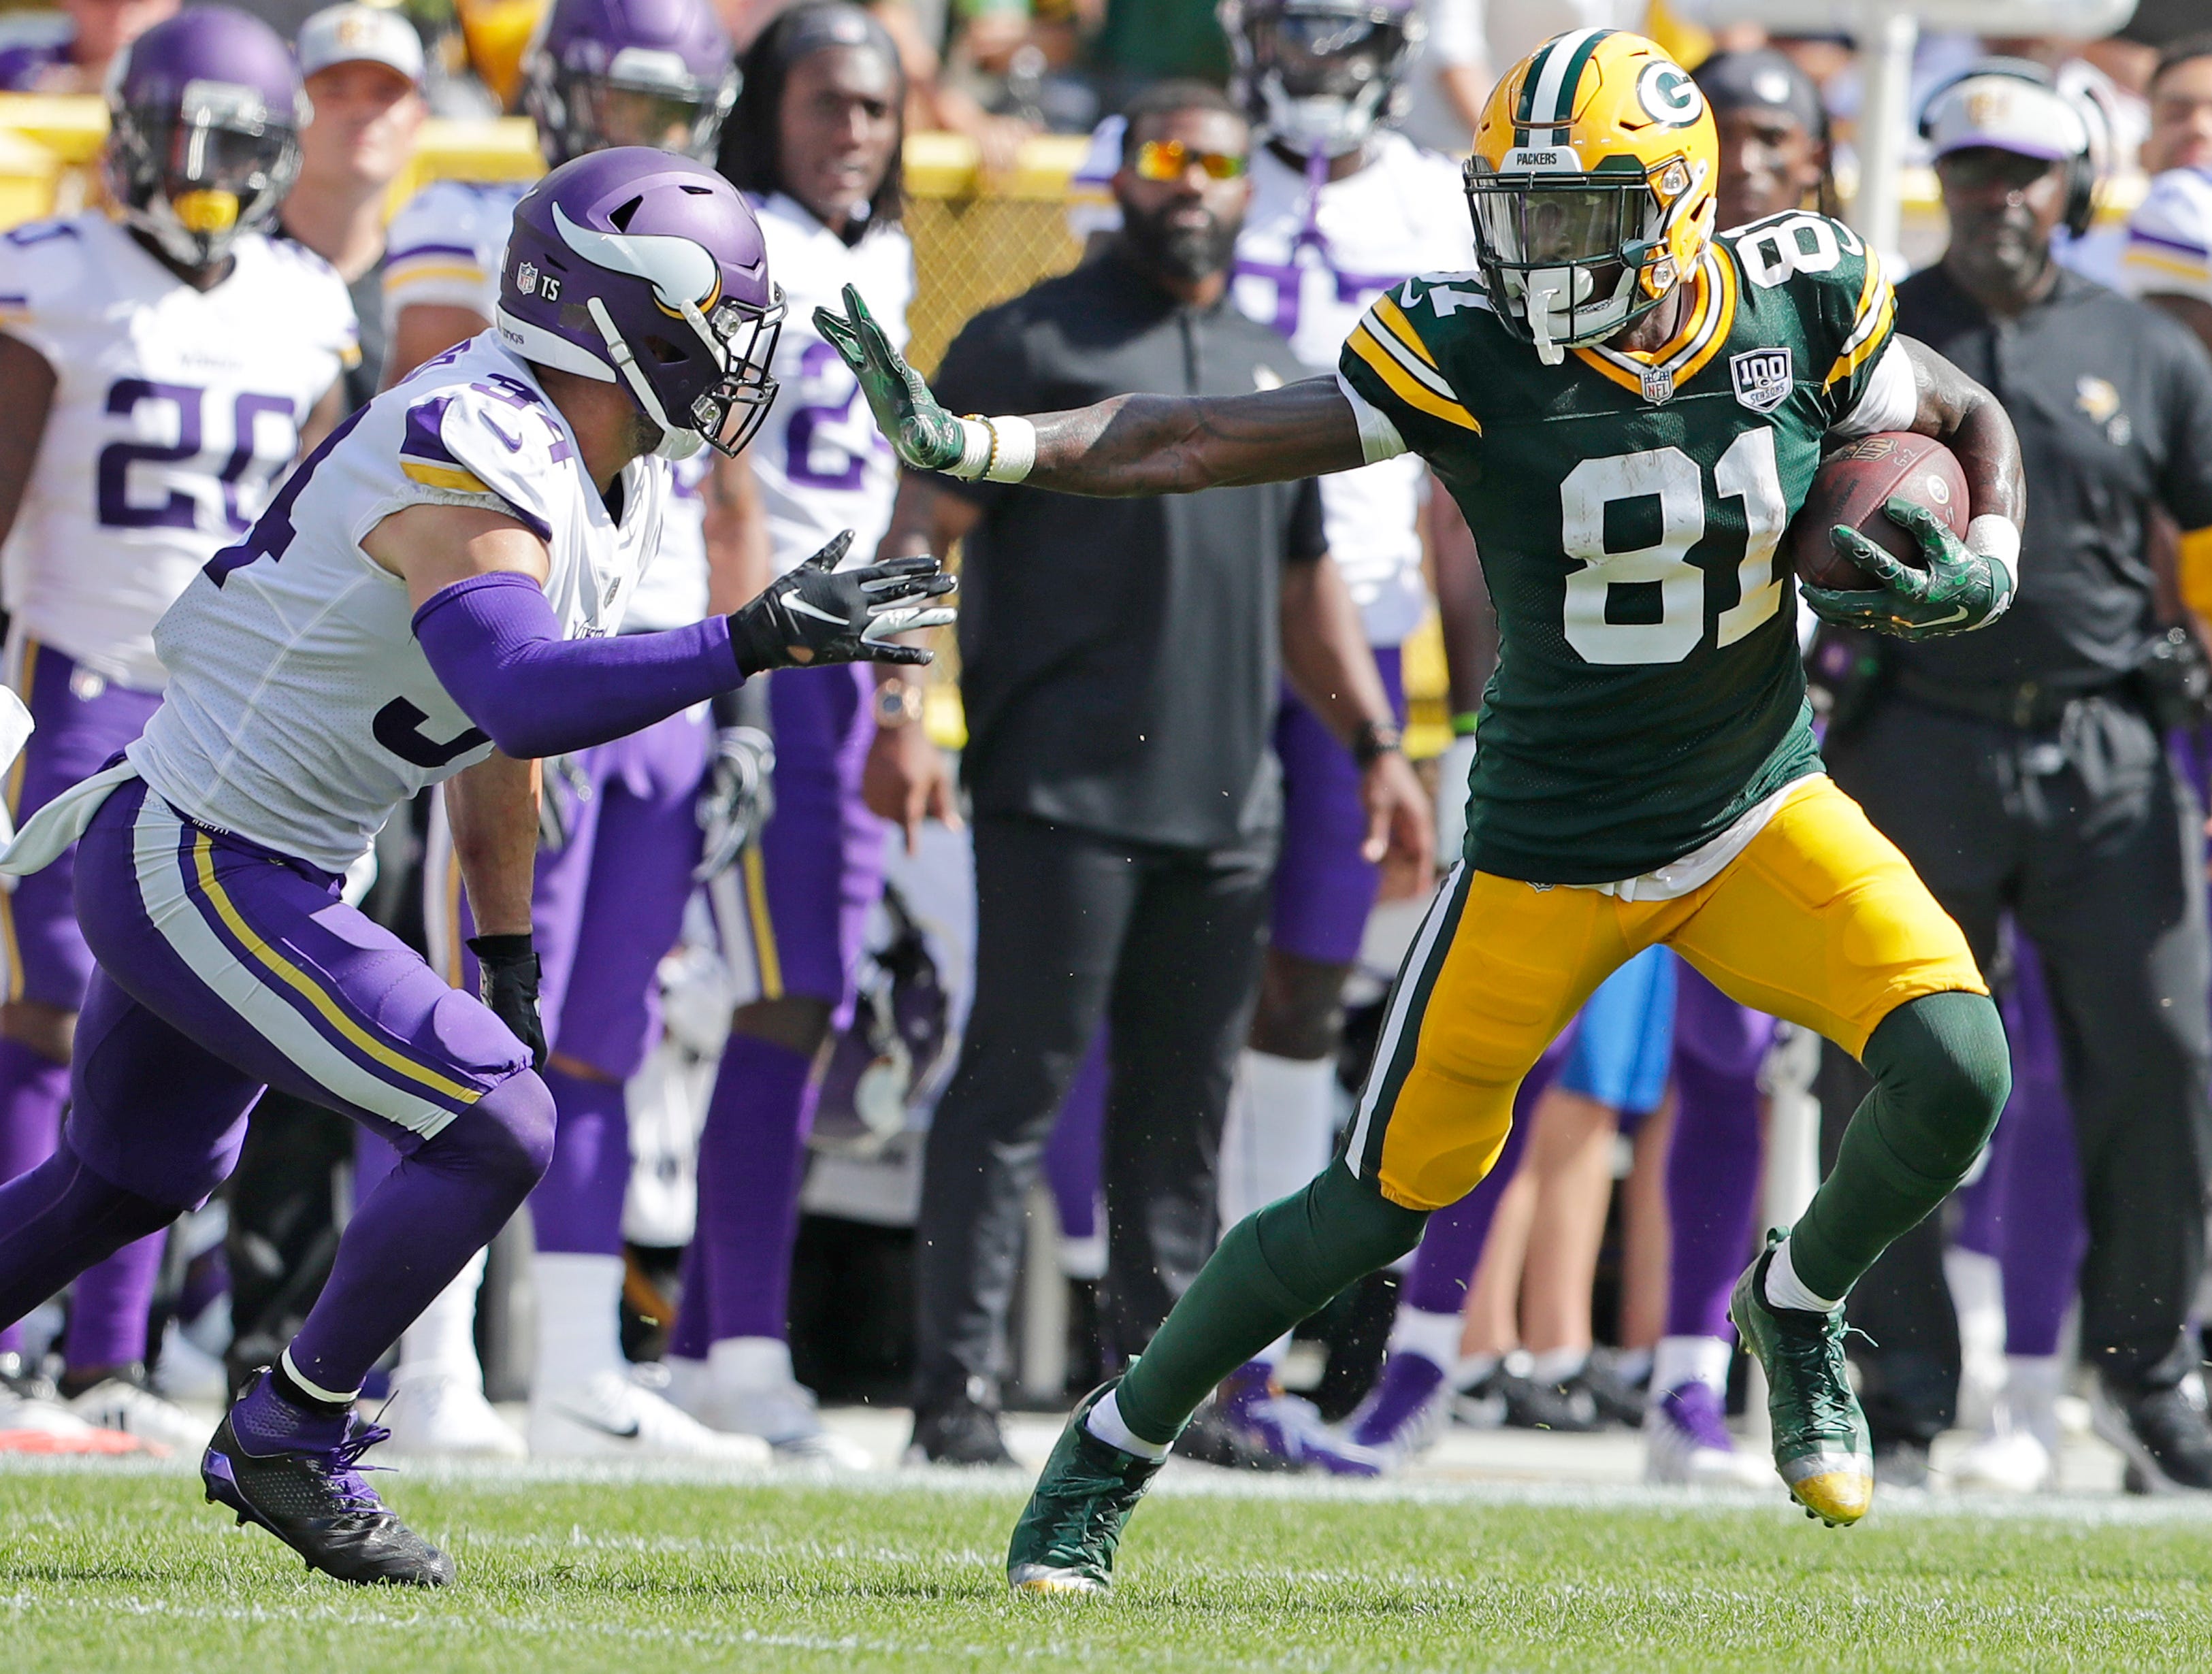 Packers wide receiver Geronimo Allison (81) runs after a catch against the Minnesota Vikings on Sept. 16 at Lambeau Field.